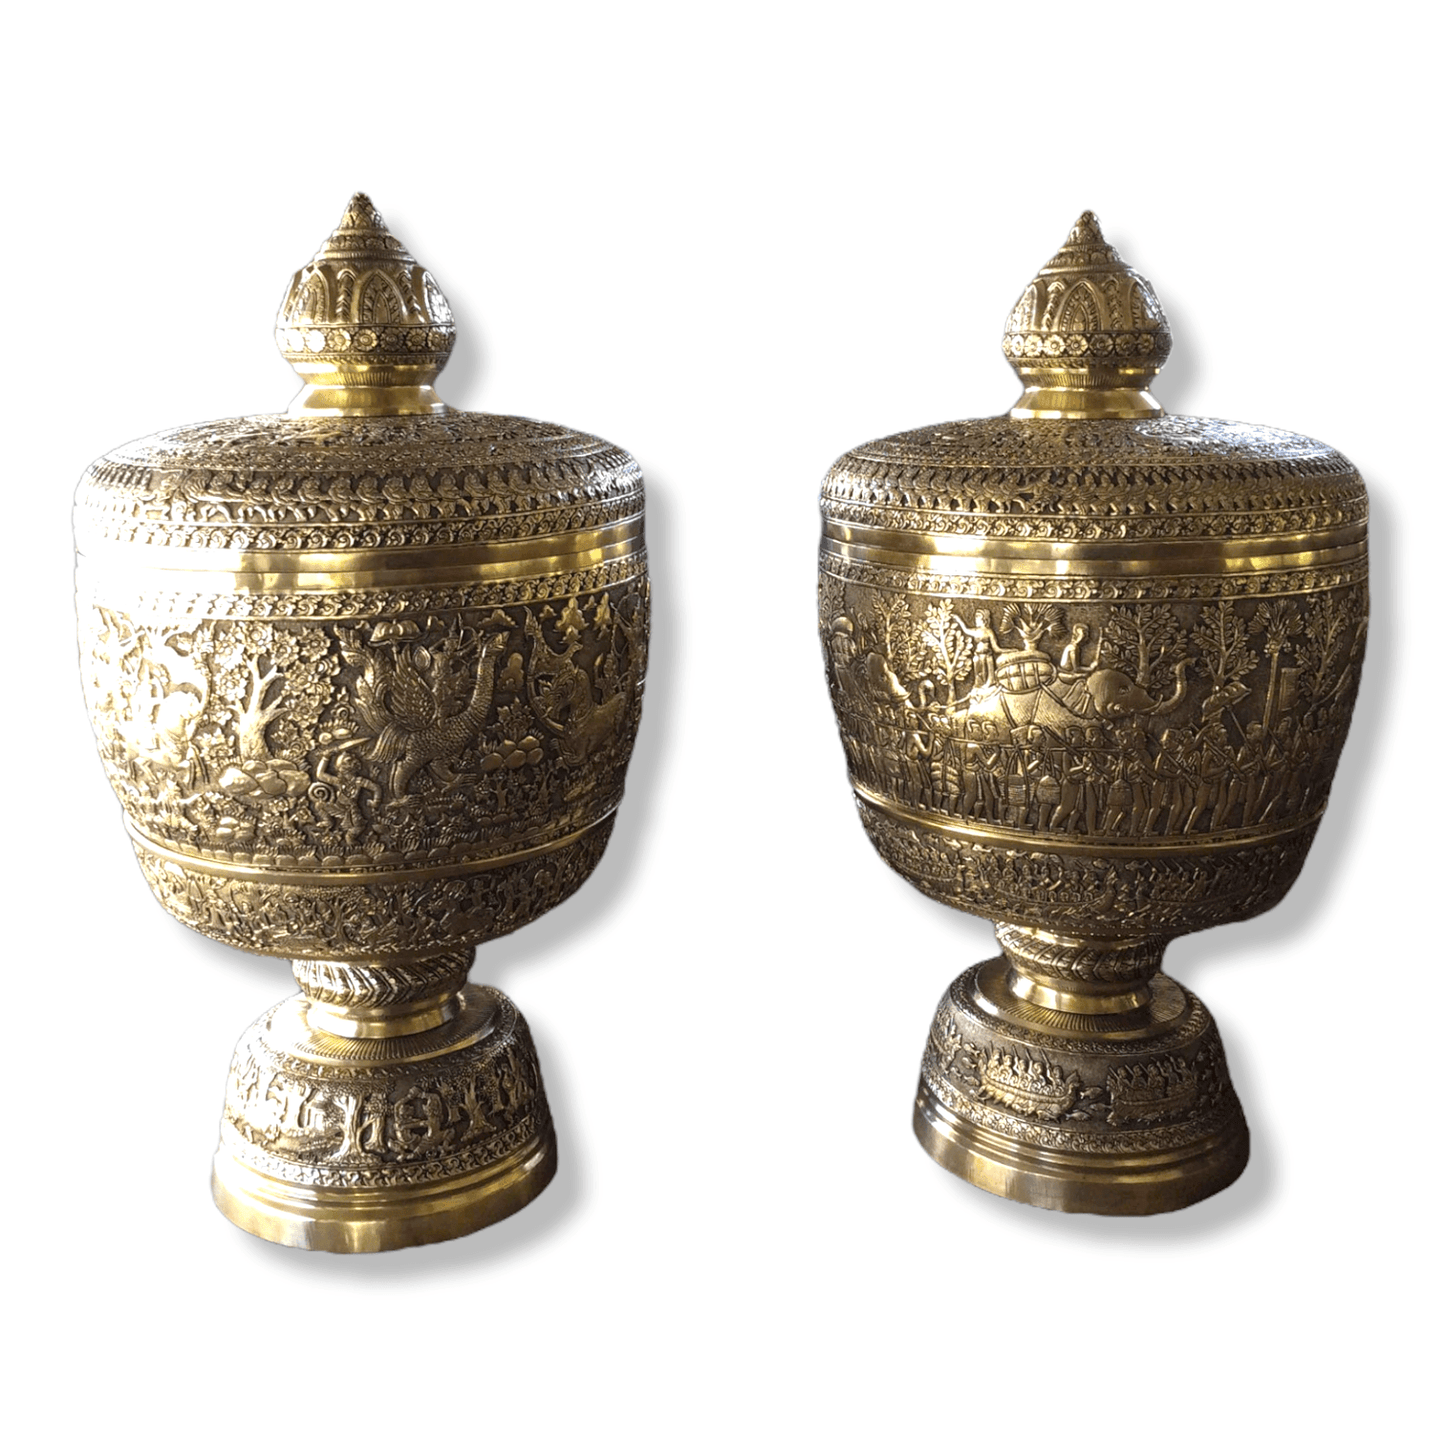 Royal Solid Brass Niello Bowl on Pedestal with Lotus Lid Royal Solid Brass Niello Bowl on Pedestal with Lotus Lid 